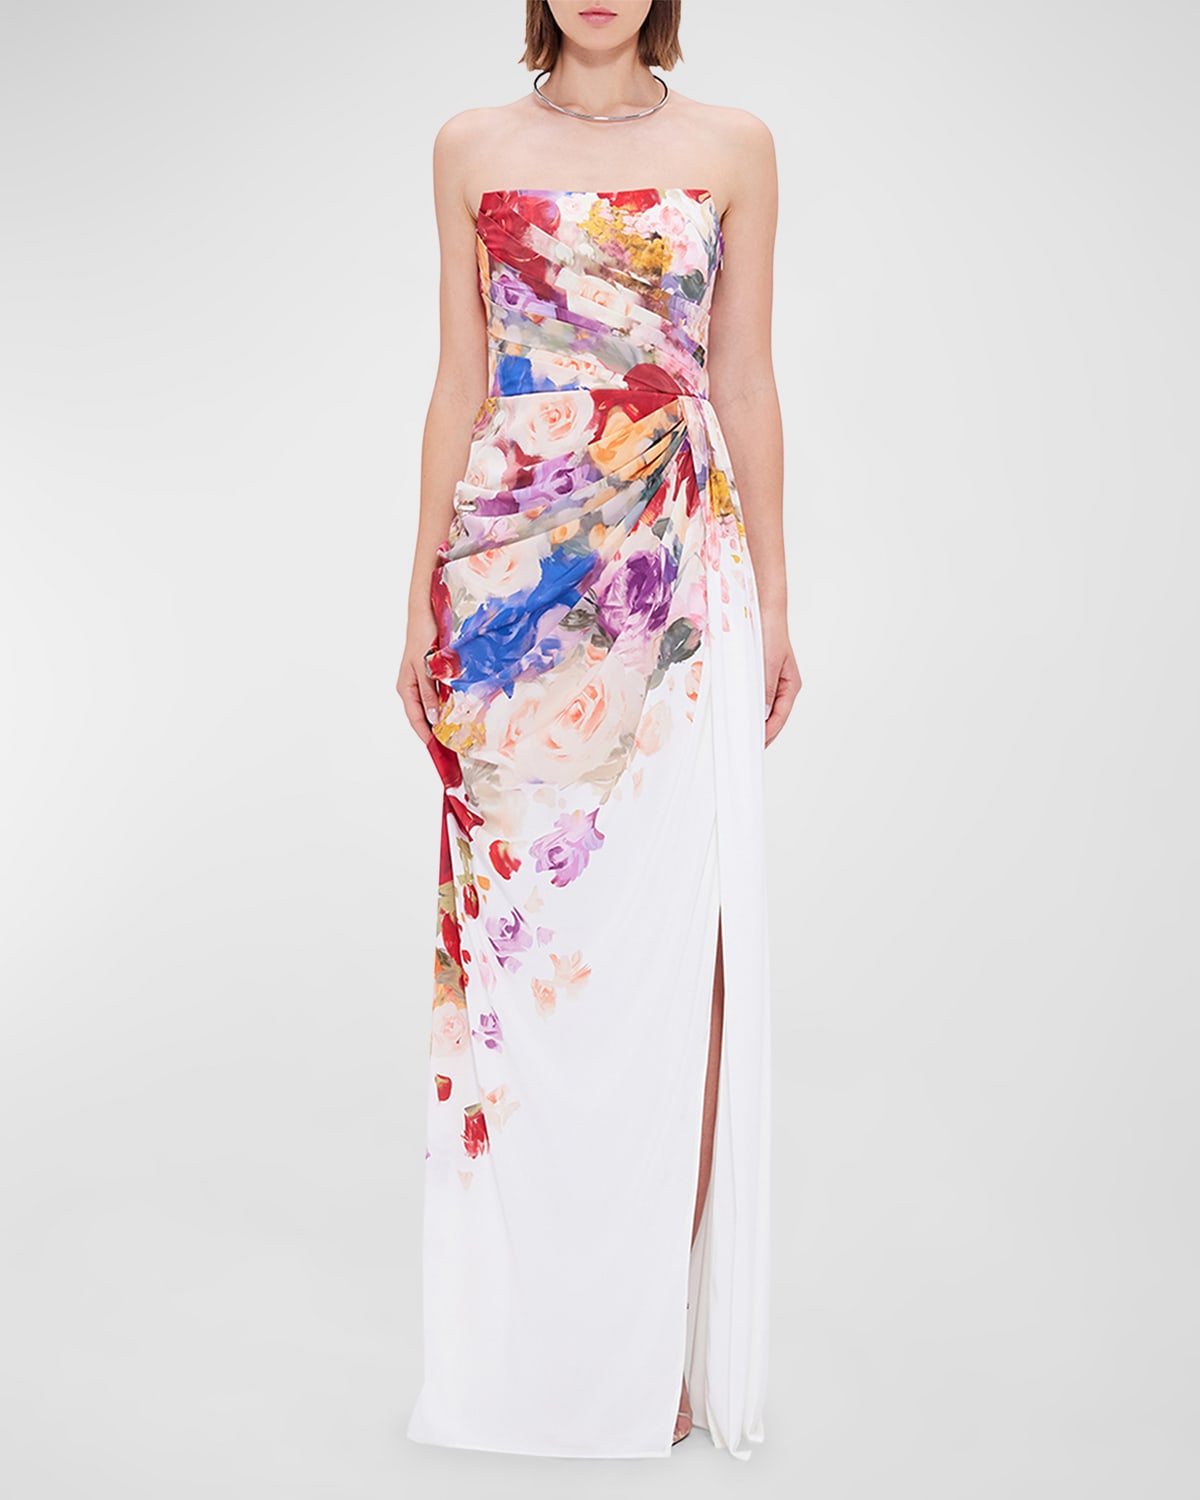 Anastasia Pleated Floral-Print Bustier Gown